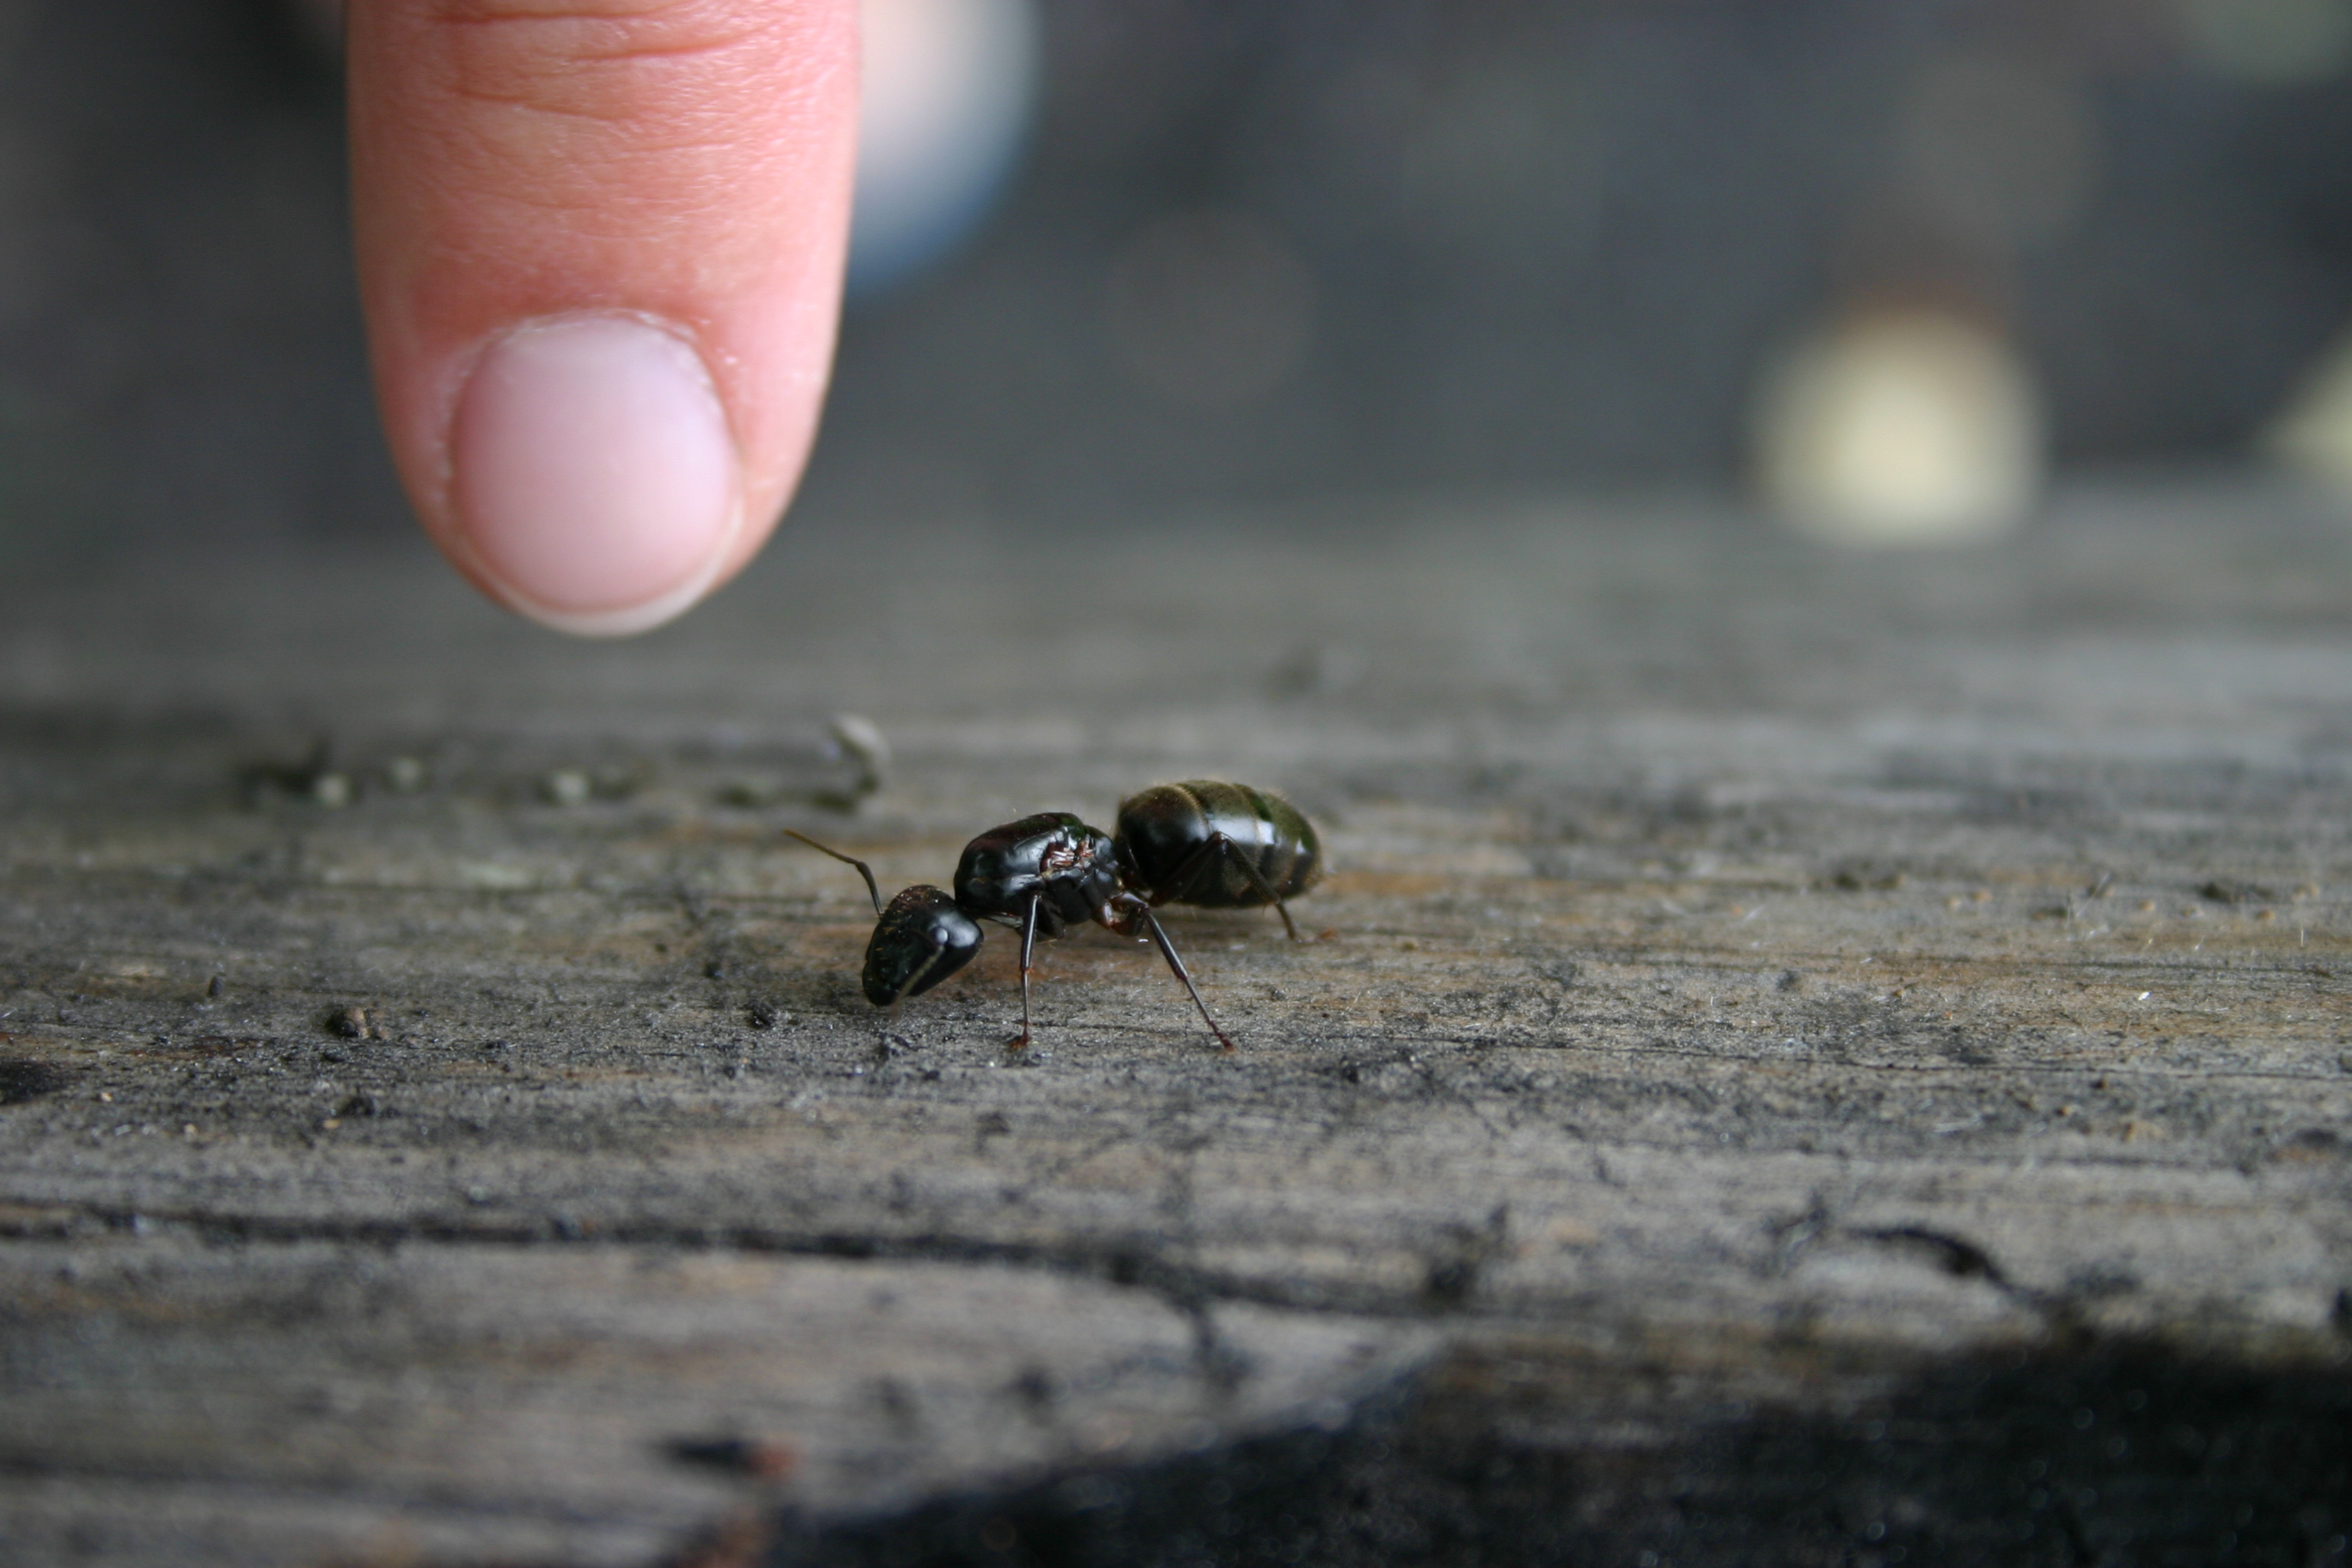 Carpenter ant next to a finger for size.